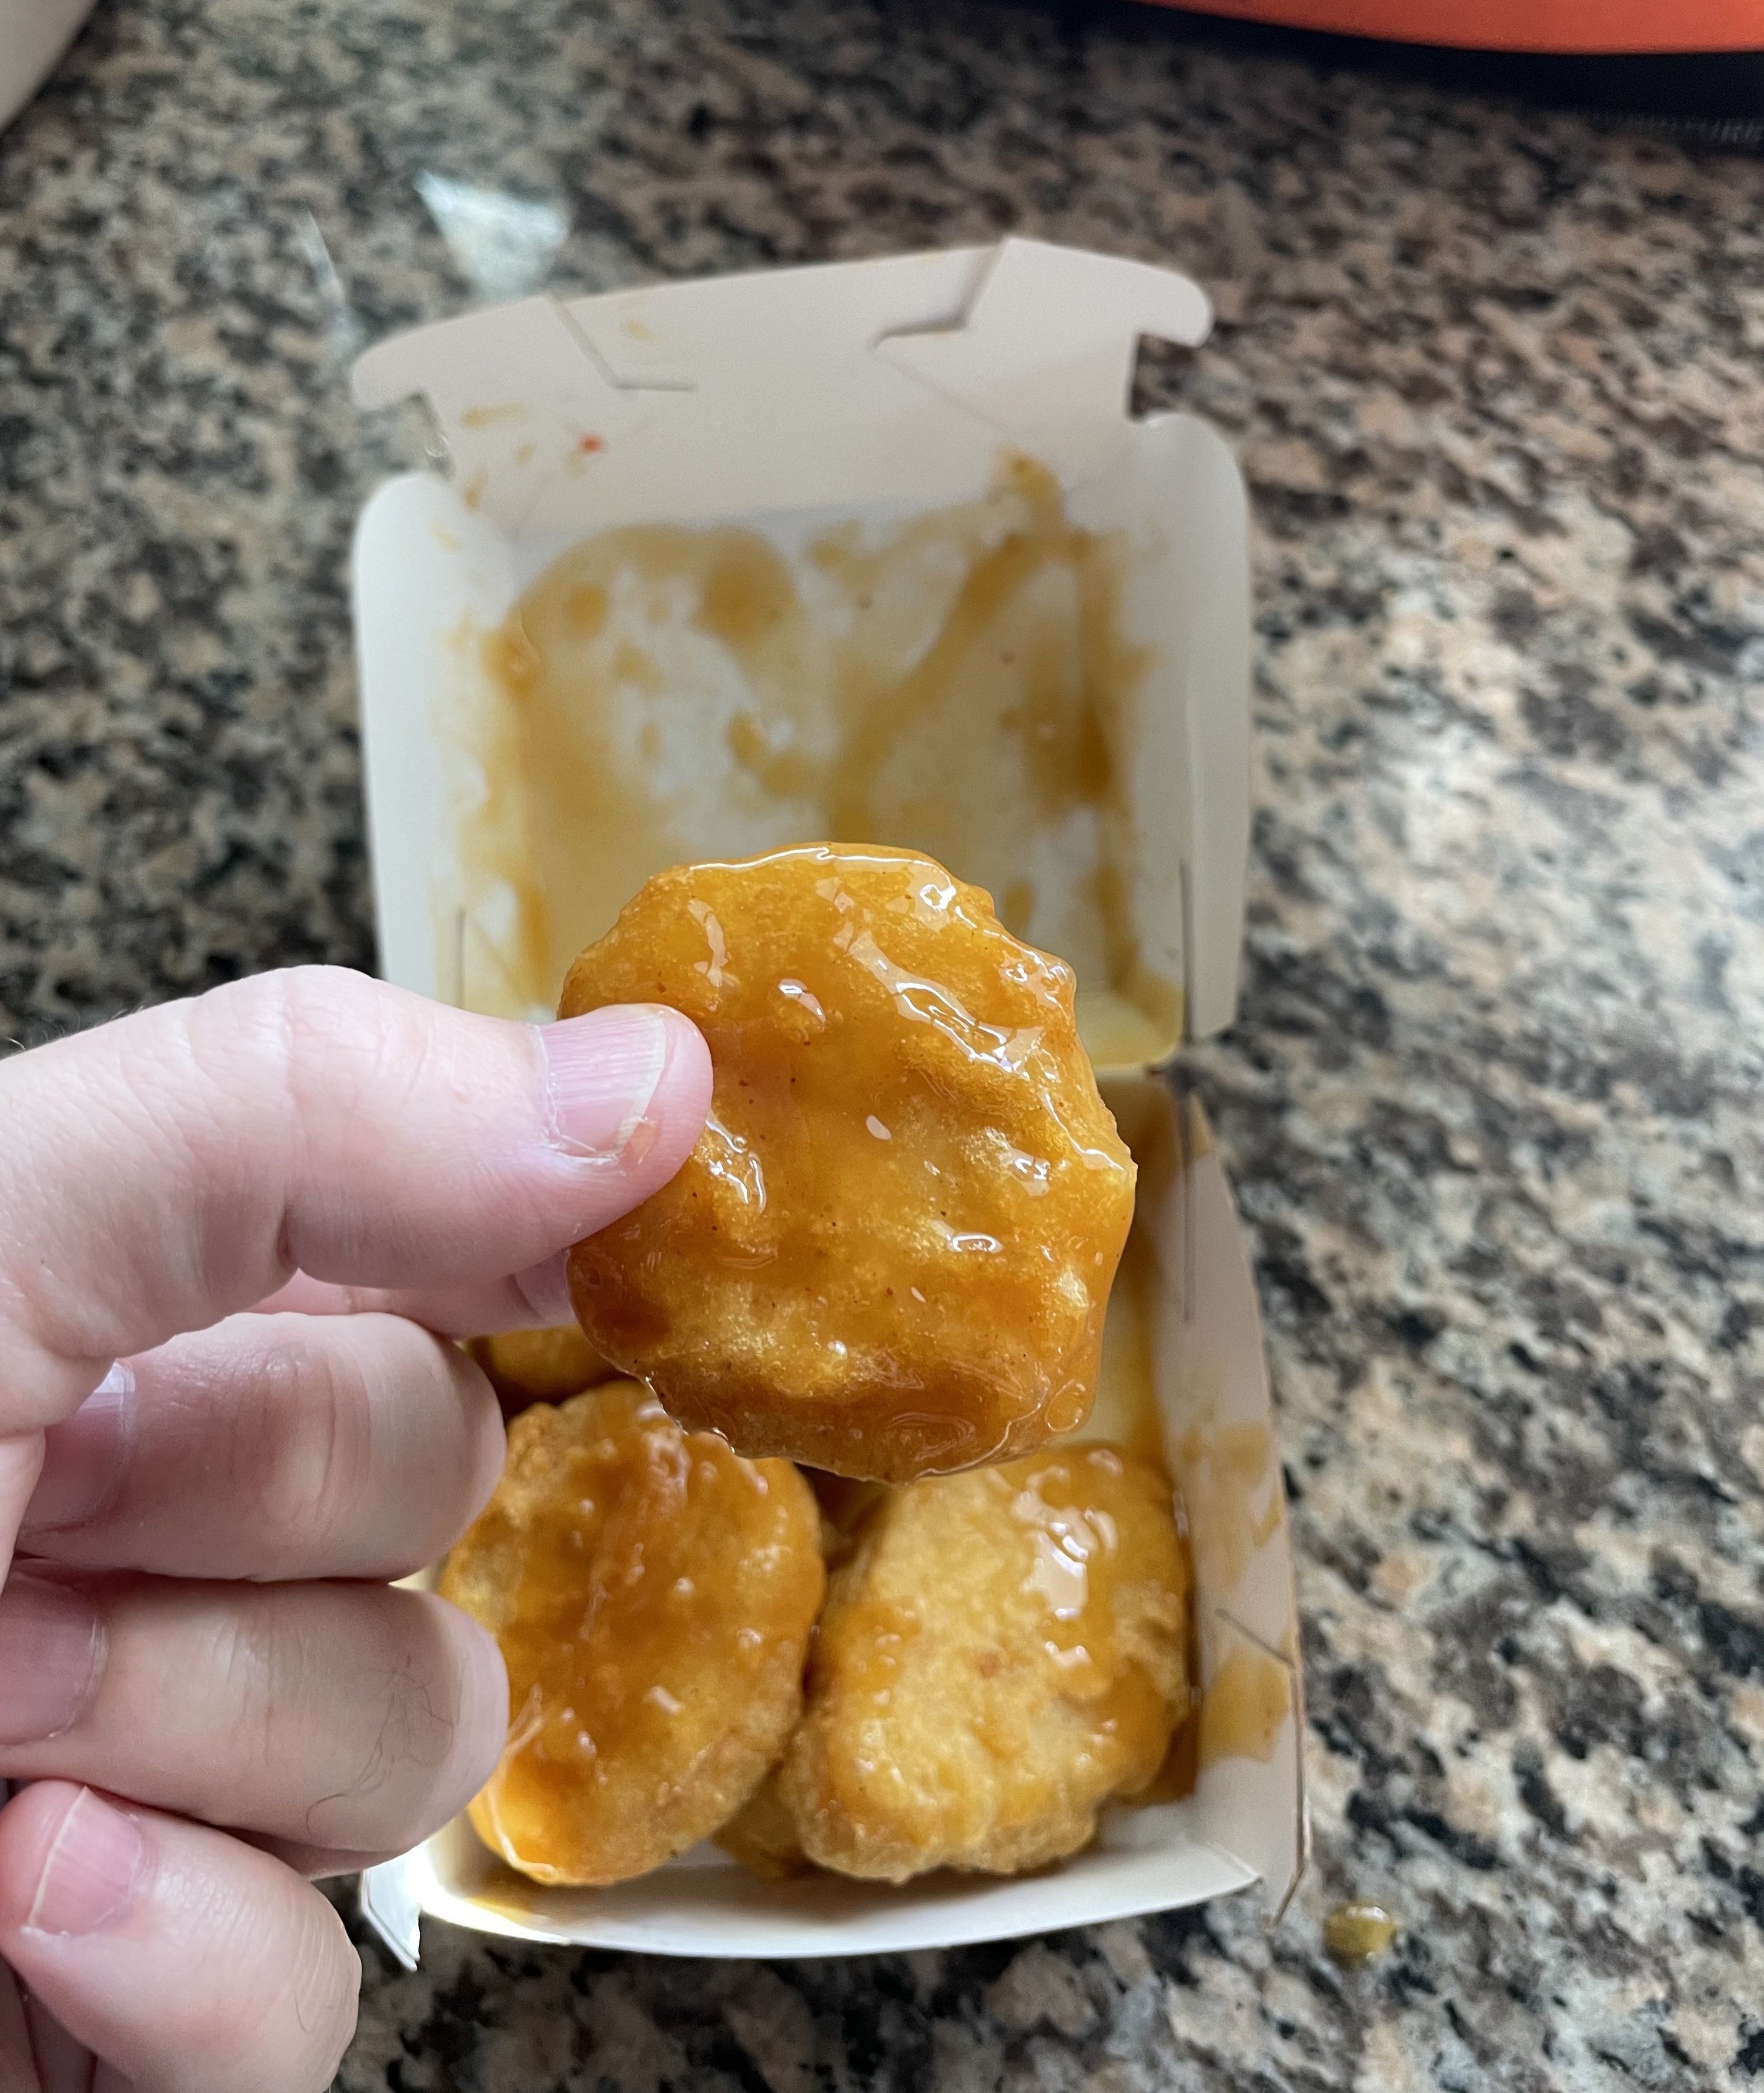 Hand holding a nugget with sauce on it